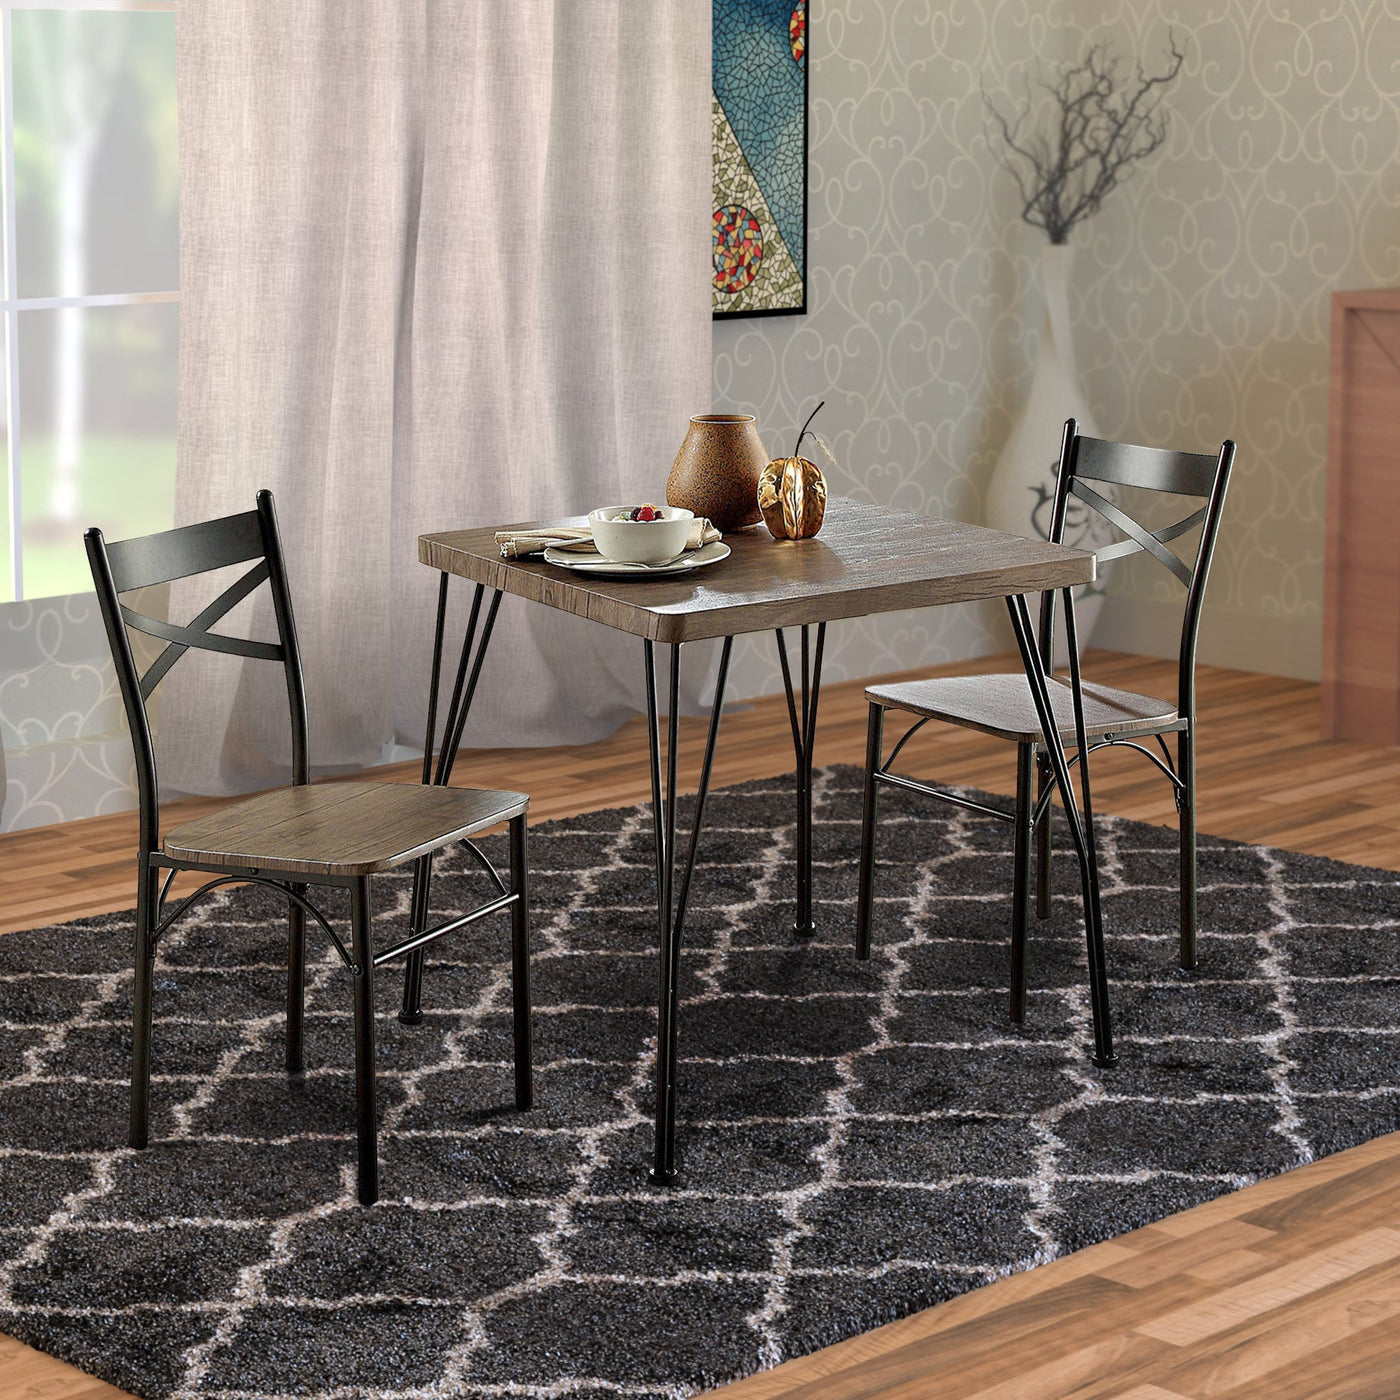 BENZARA Industrial Style 3 Piece Dining Table Wood And Metal, Brown And Black - BM119853